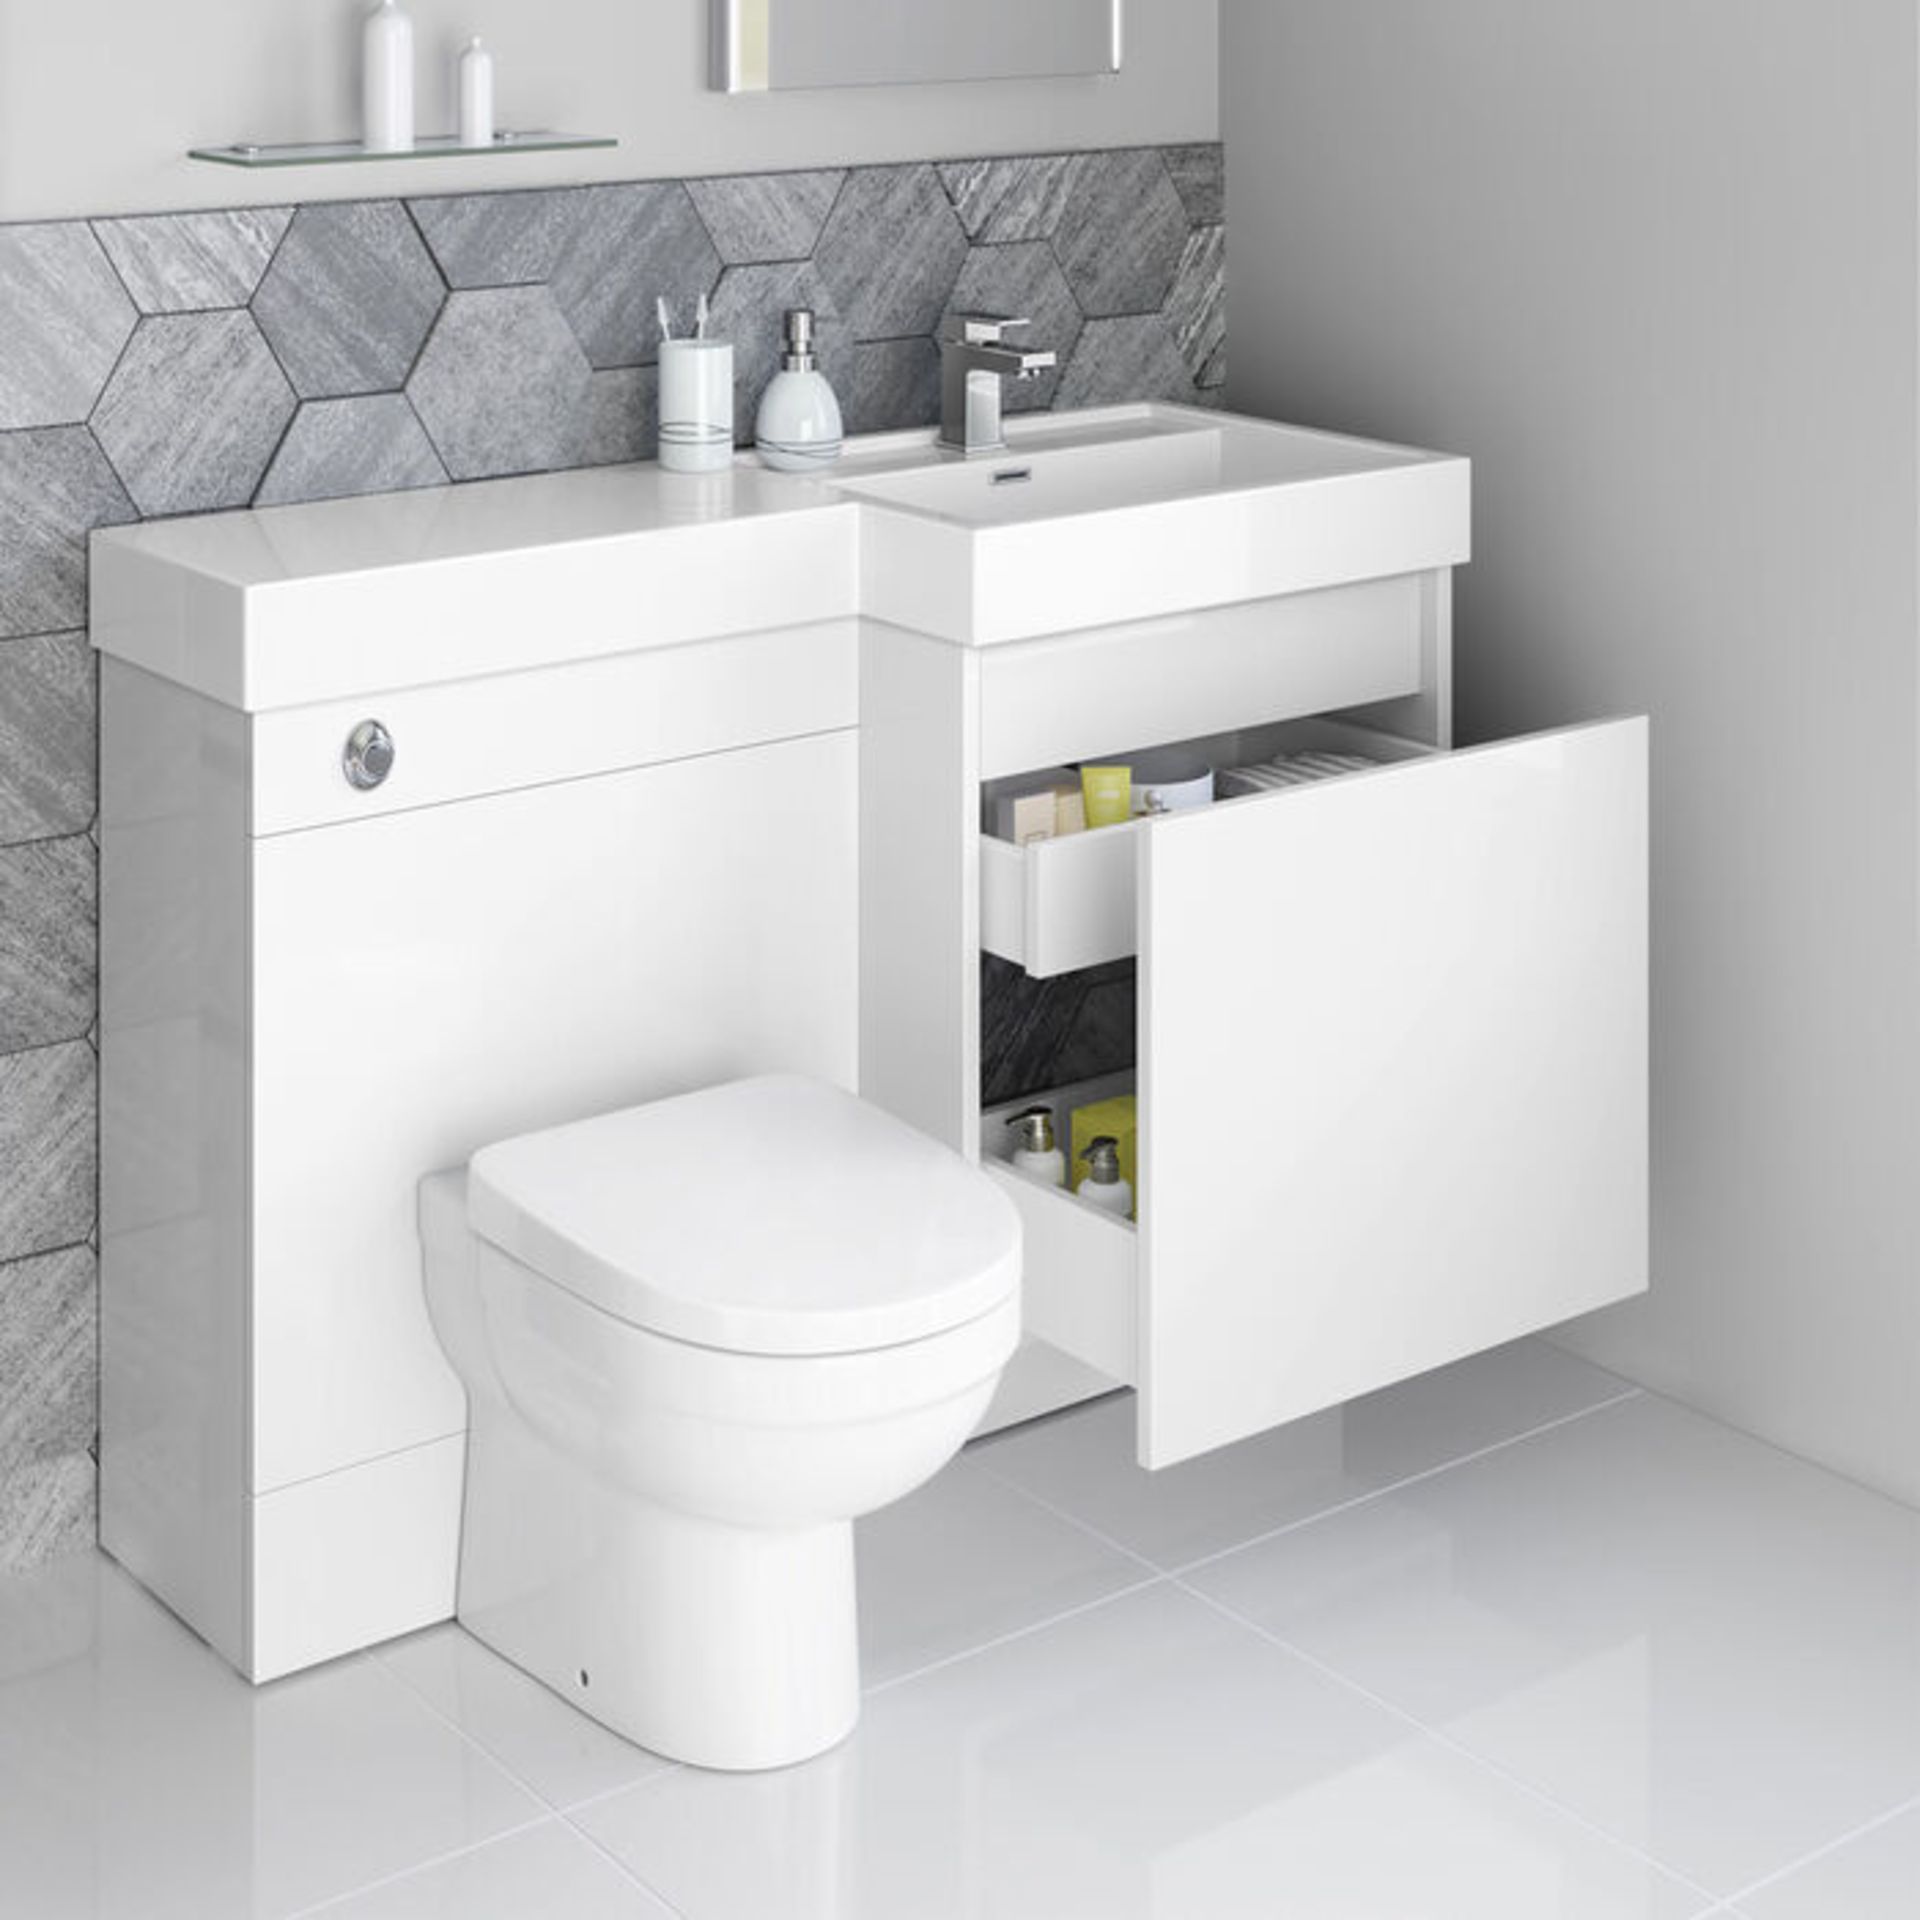 (PM9) 1206mm Olympia Gloss White Drawer Vanity Unit - Sabrosa Pan. L-Shaped combined vanity uni... - Image 2 of 3